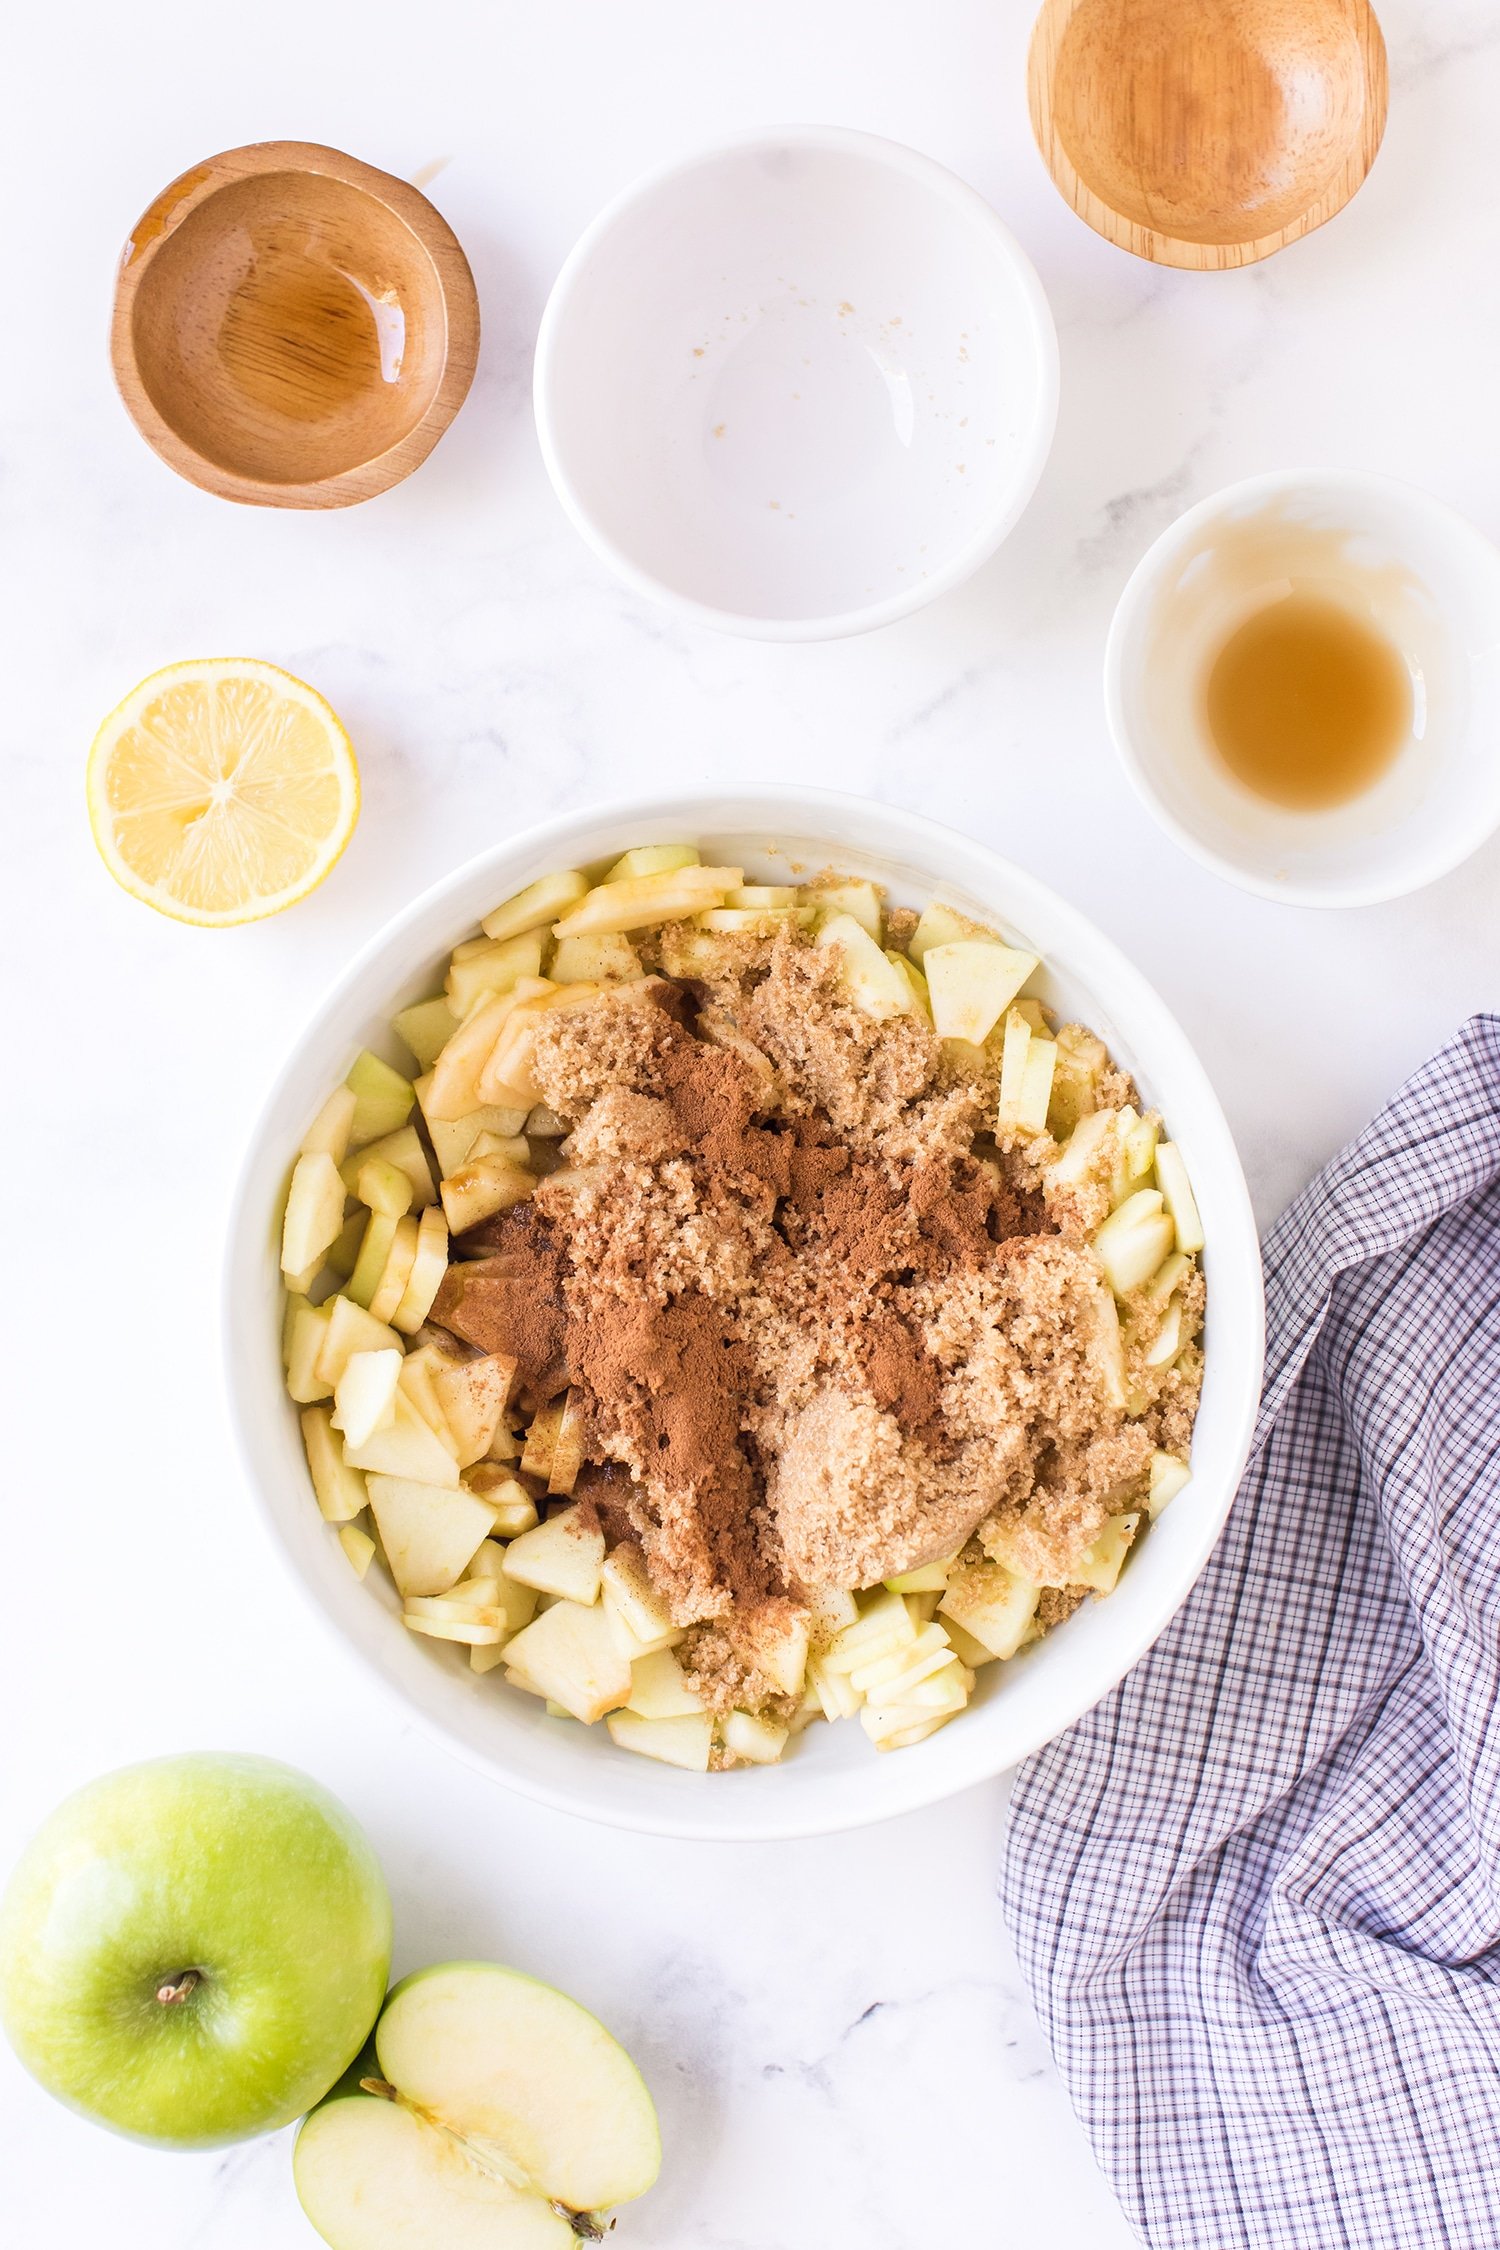 Apples , cinnamon, and brown sugar in bowl surrounded by apples and empty smaller bowls